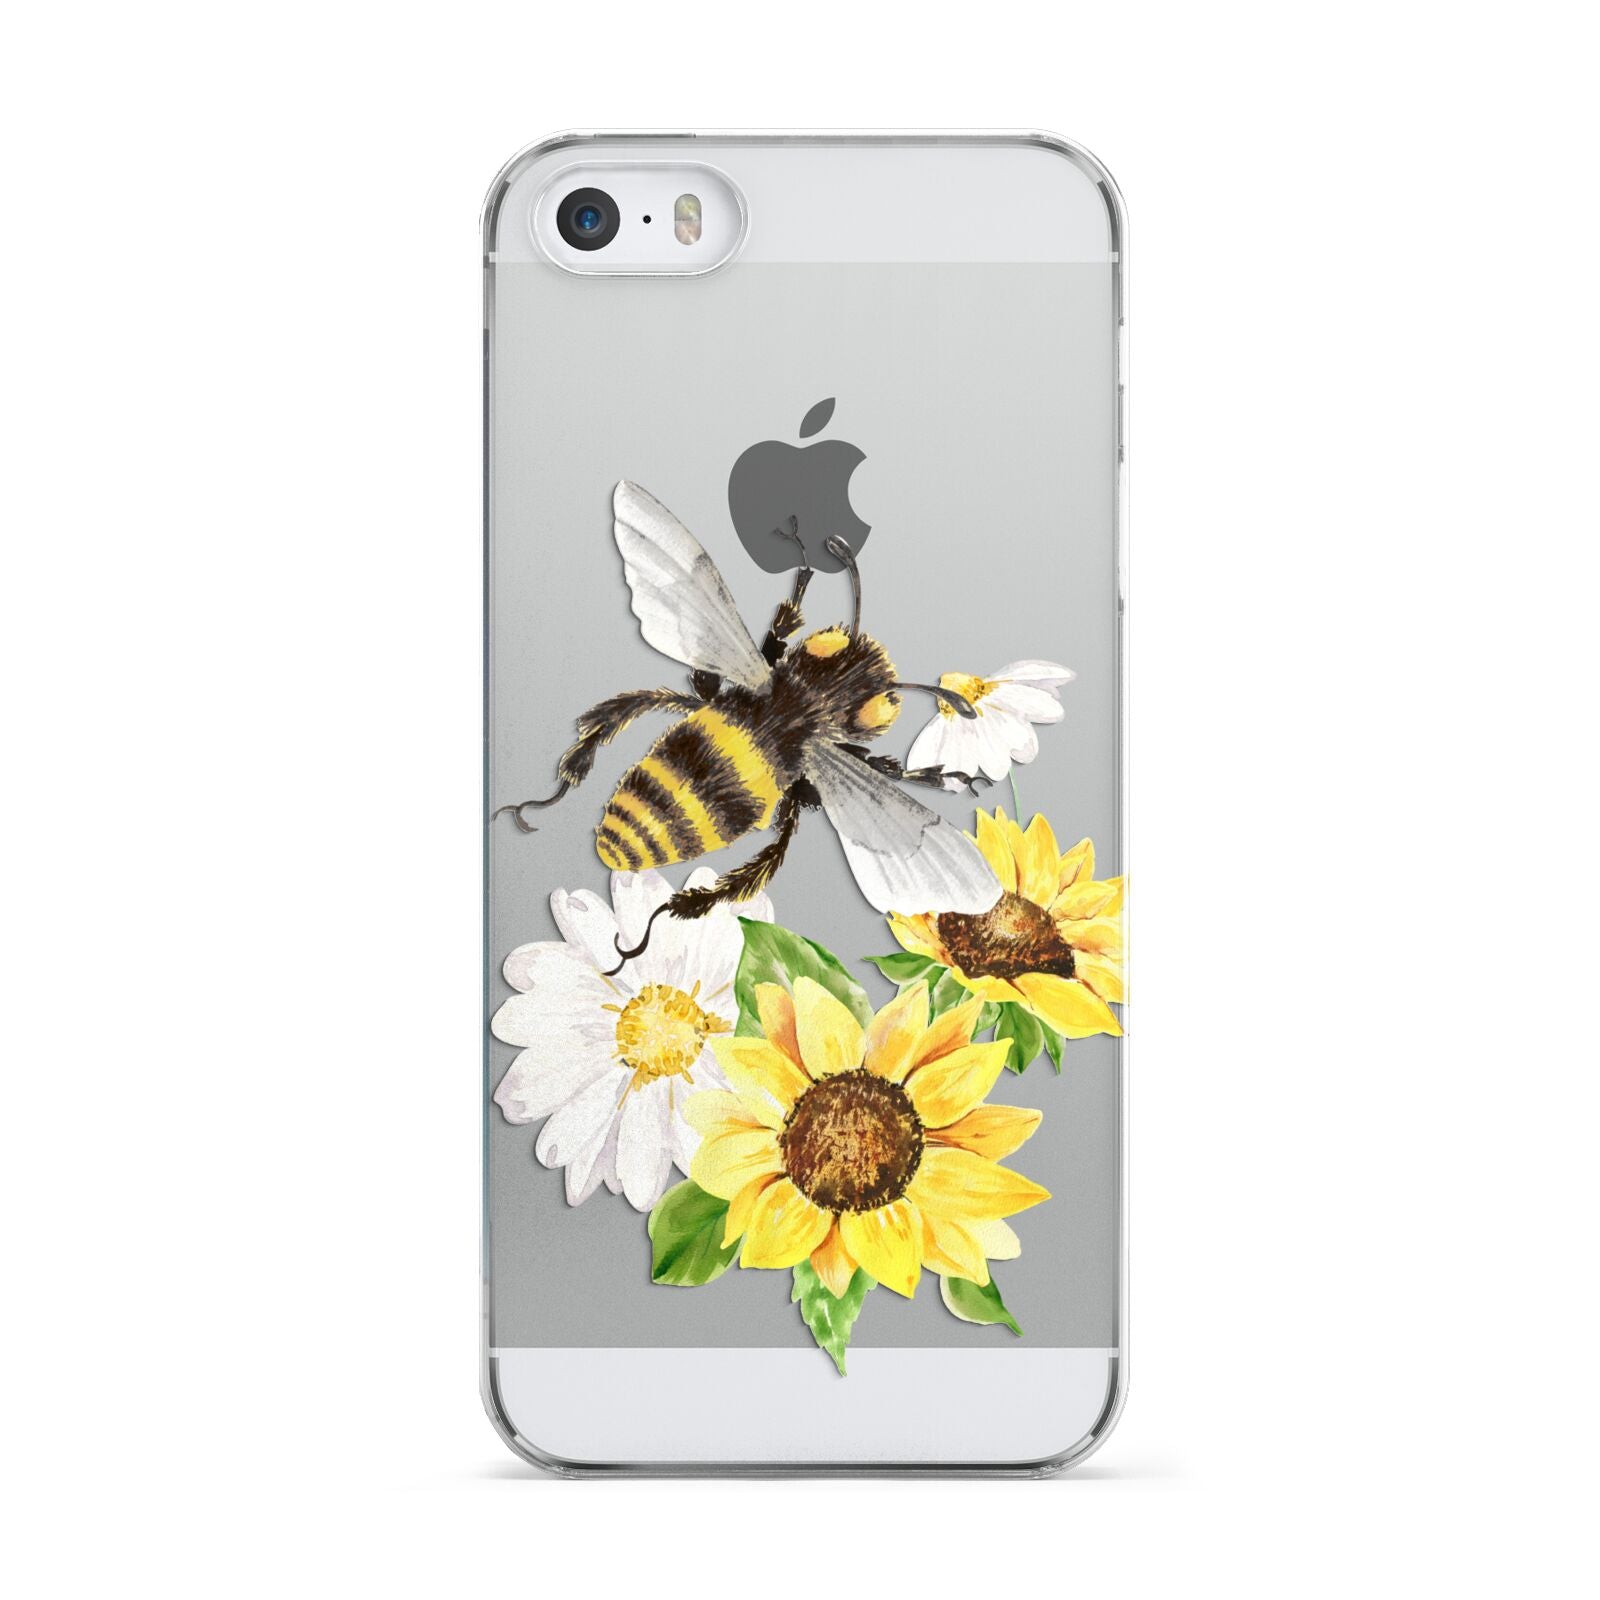 Watercolour Bee and Sunflowers Apple iPhone 5 Case